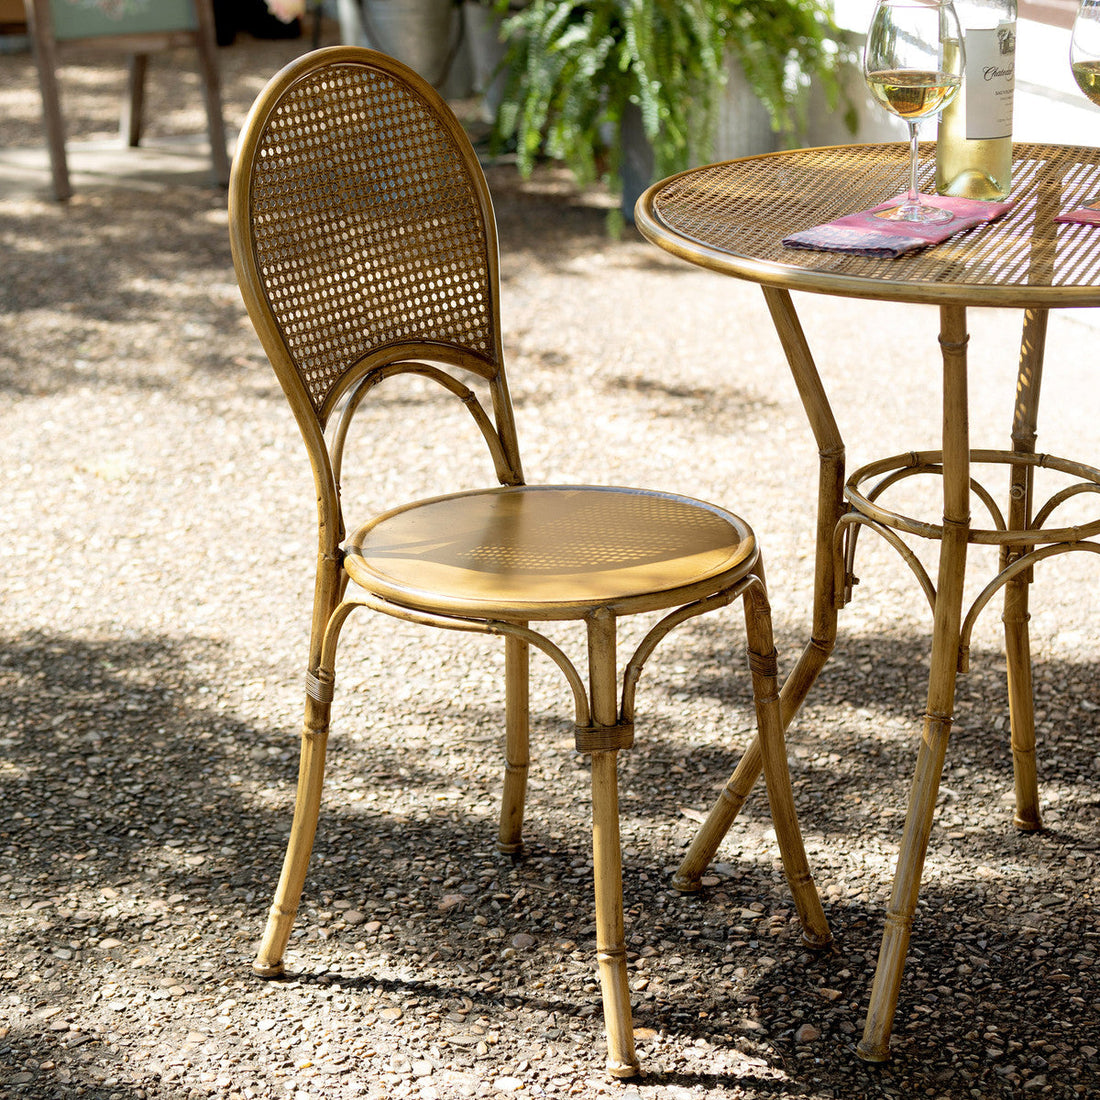 A Park Hill metal bamboo bistro chair near a table with a glass of white wine in an outdoor coastal living setting.